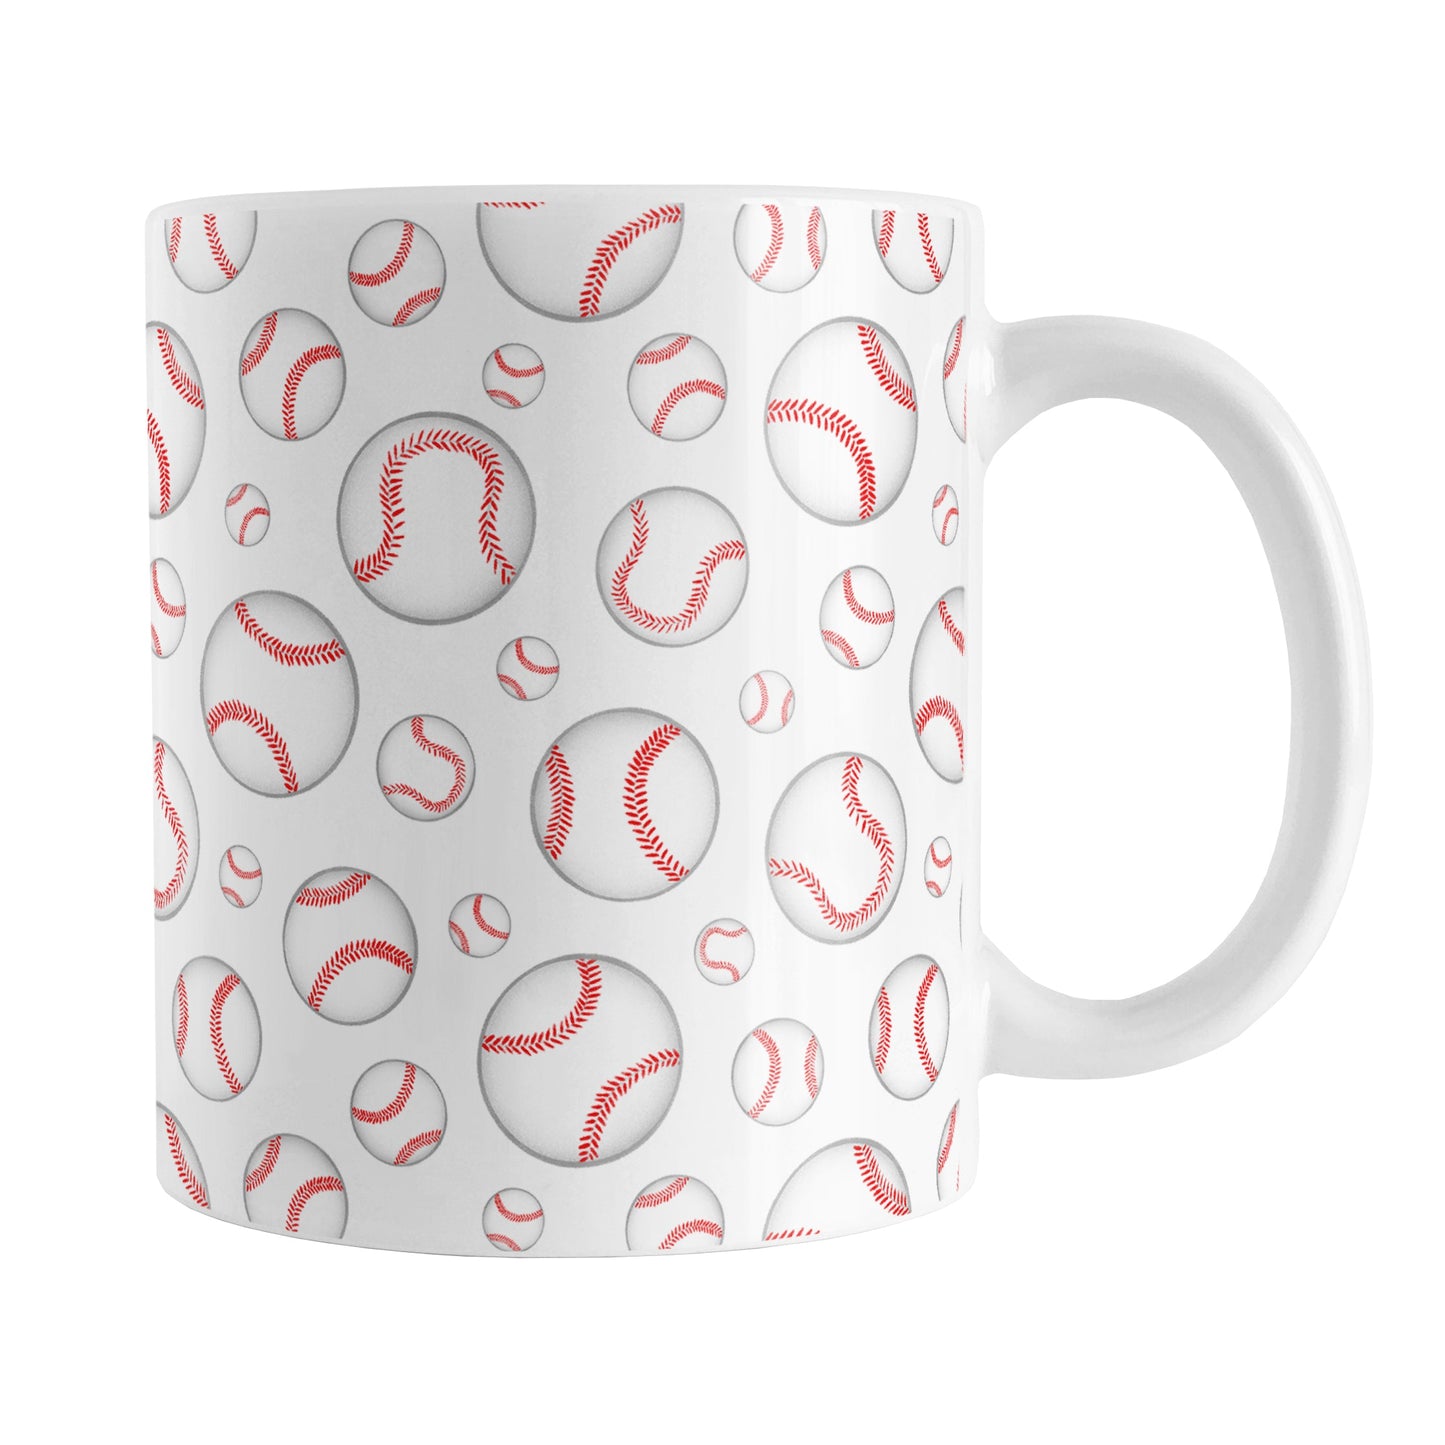 Baseballs Pattern Mug (11oz) at Amy's Coffee Mugs. A ceramic coffee mug designed with hand-drawn baseballs in varying sizes in a pattern that wraps around the mug to the handle. It's perfect for anyone who loves the game of baseball.